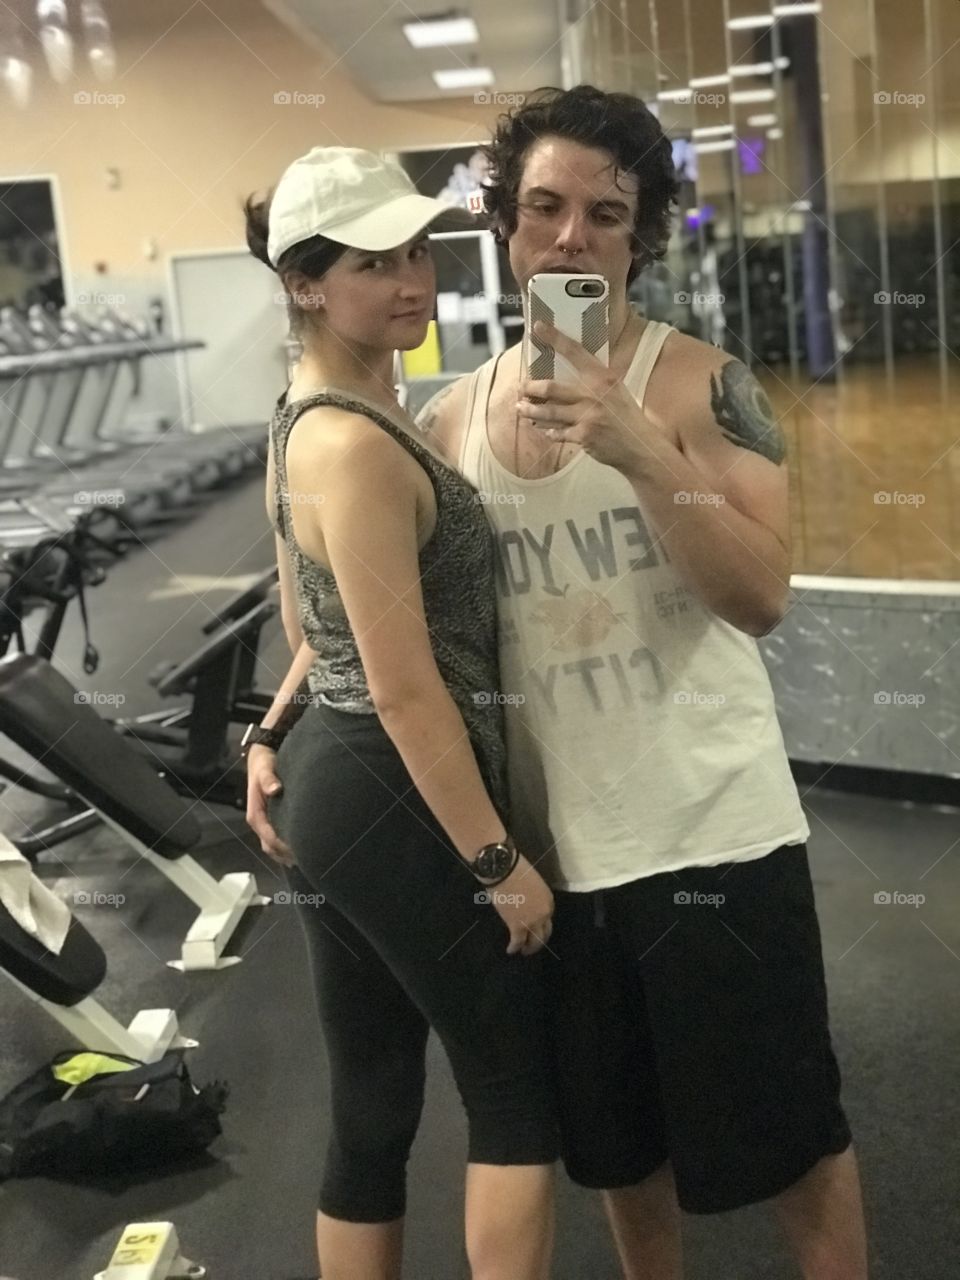 Workout with my love 